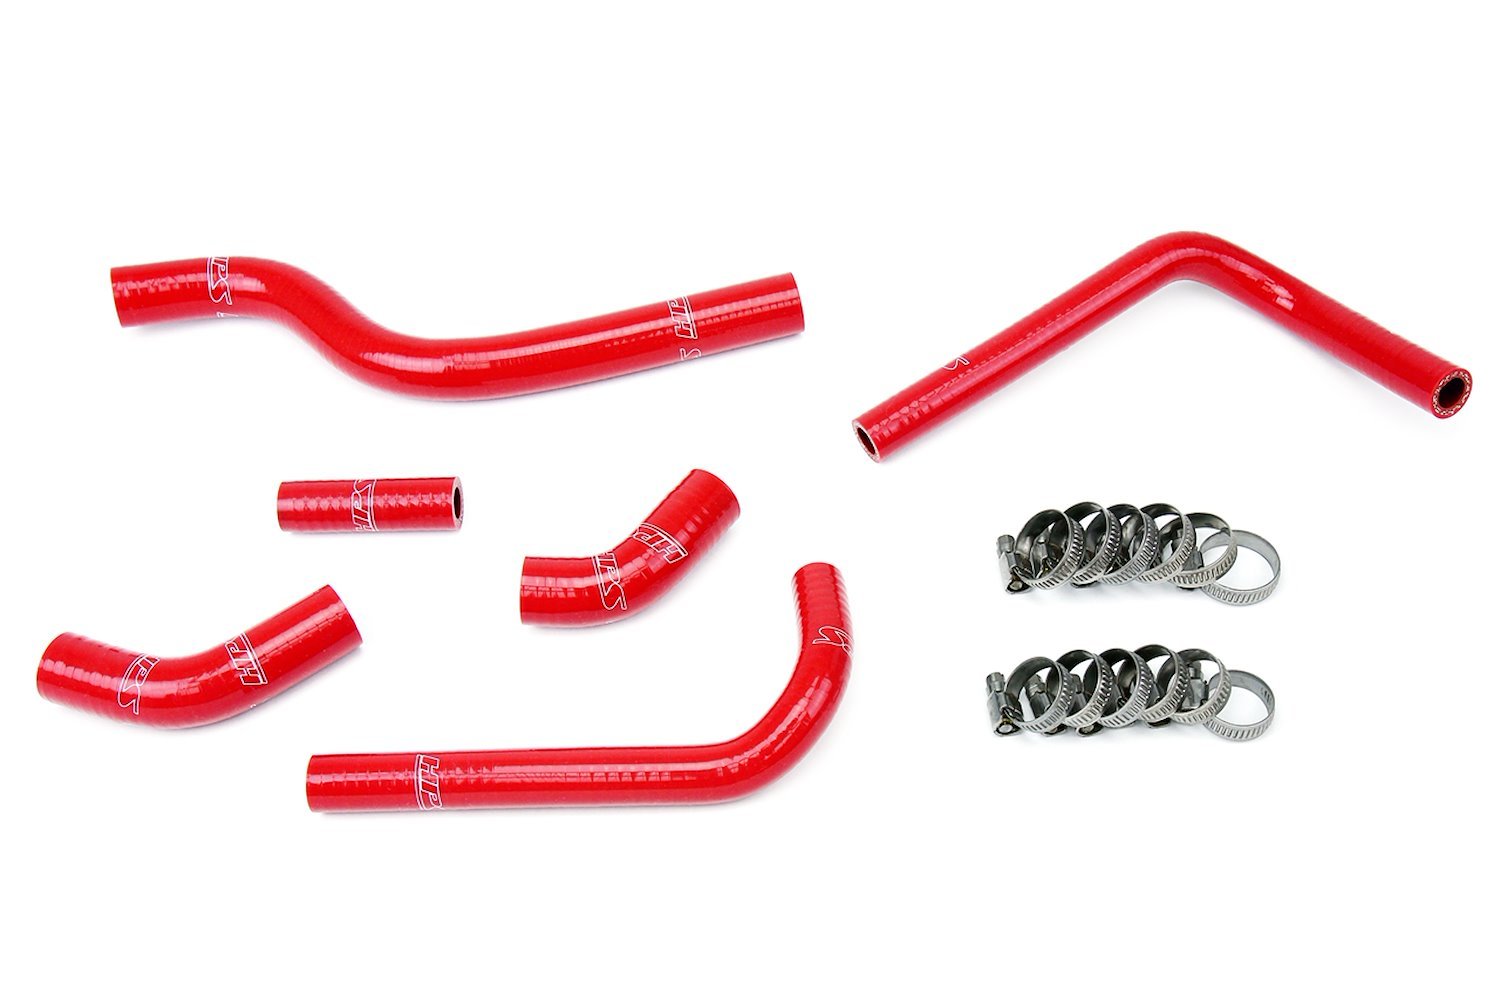 57-1252-RED Radiator Hose Kit, High-Temp 3-Ply Reinforced Silicone, Replace OEM Rubber Radiator Coolant Hoses